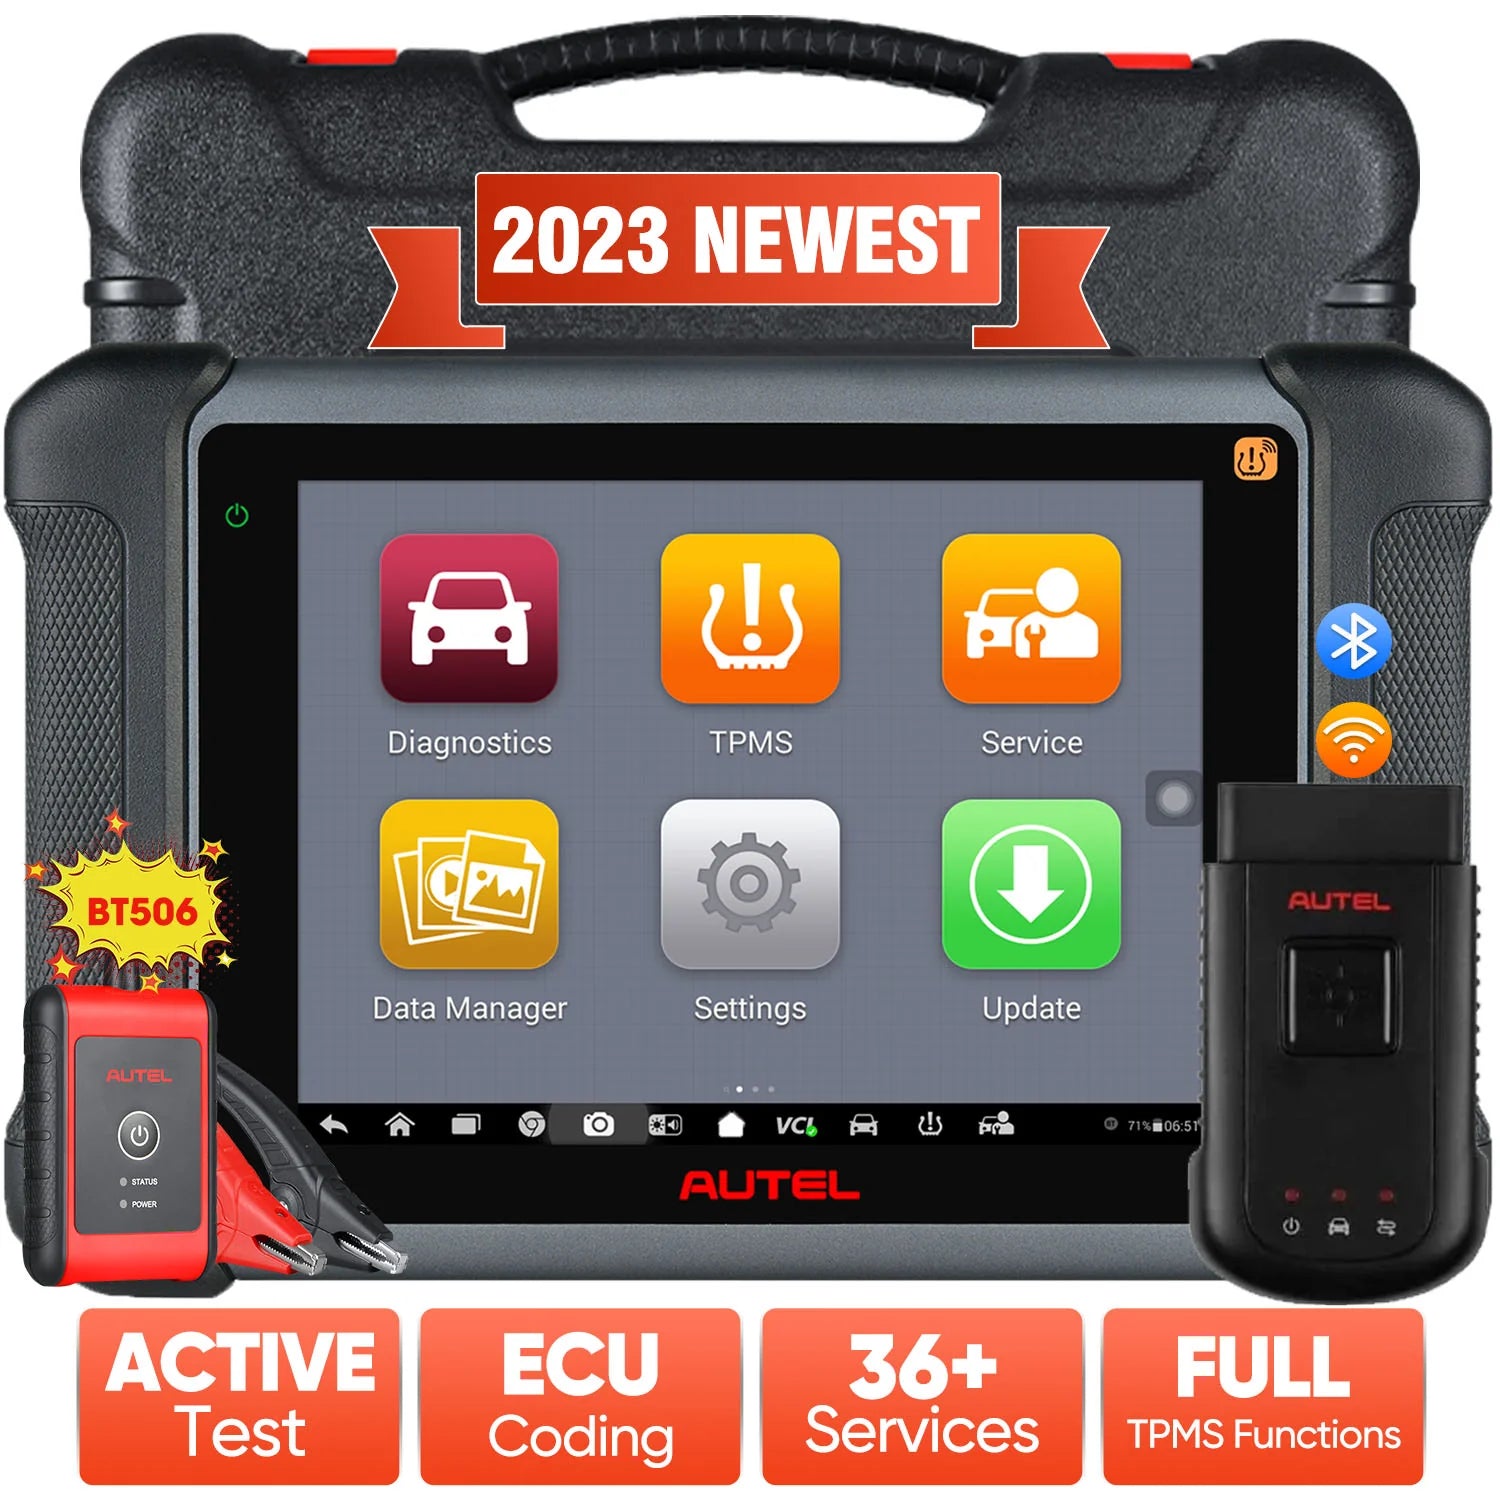 Autel Maxisys MS906TS Diagnostic Scanner Full Tpms functions and BT506